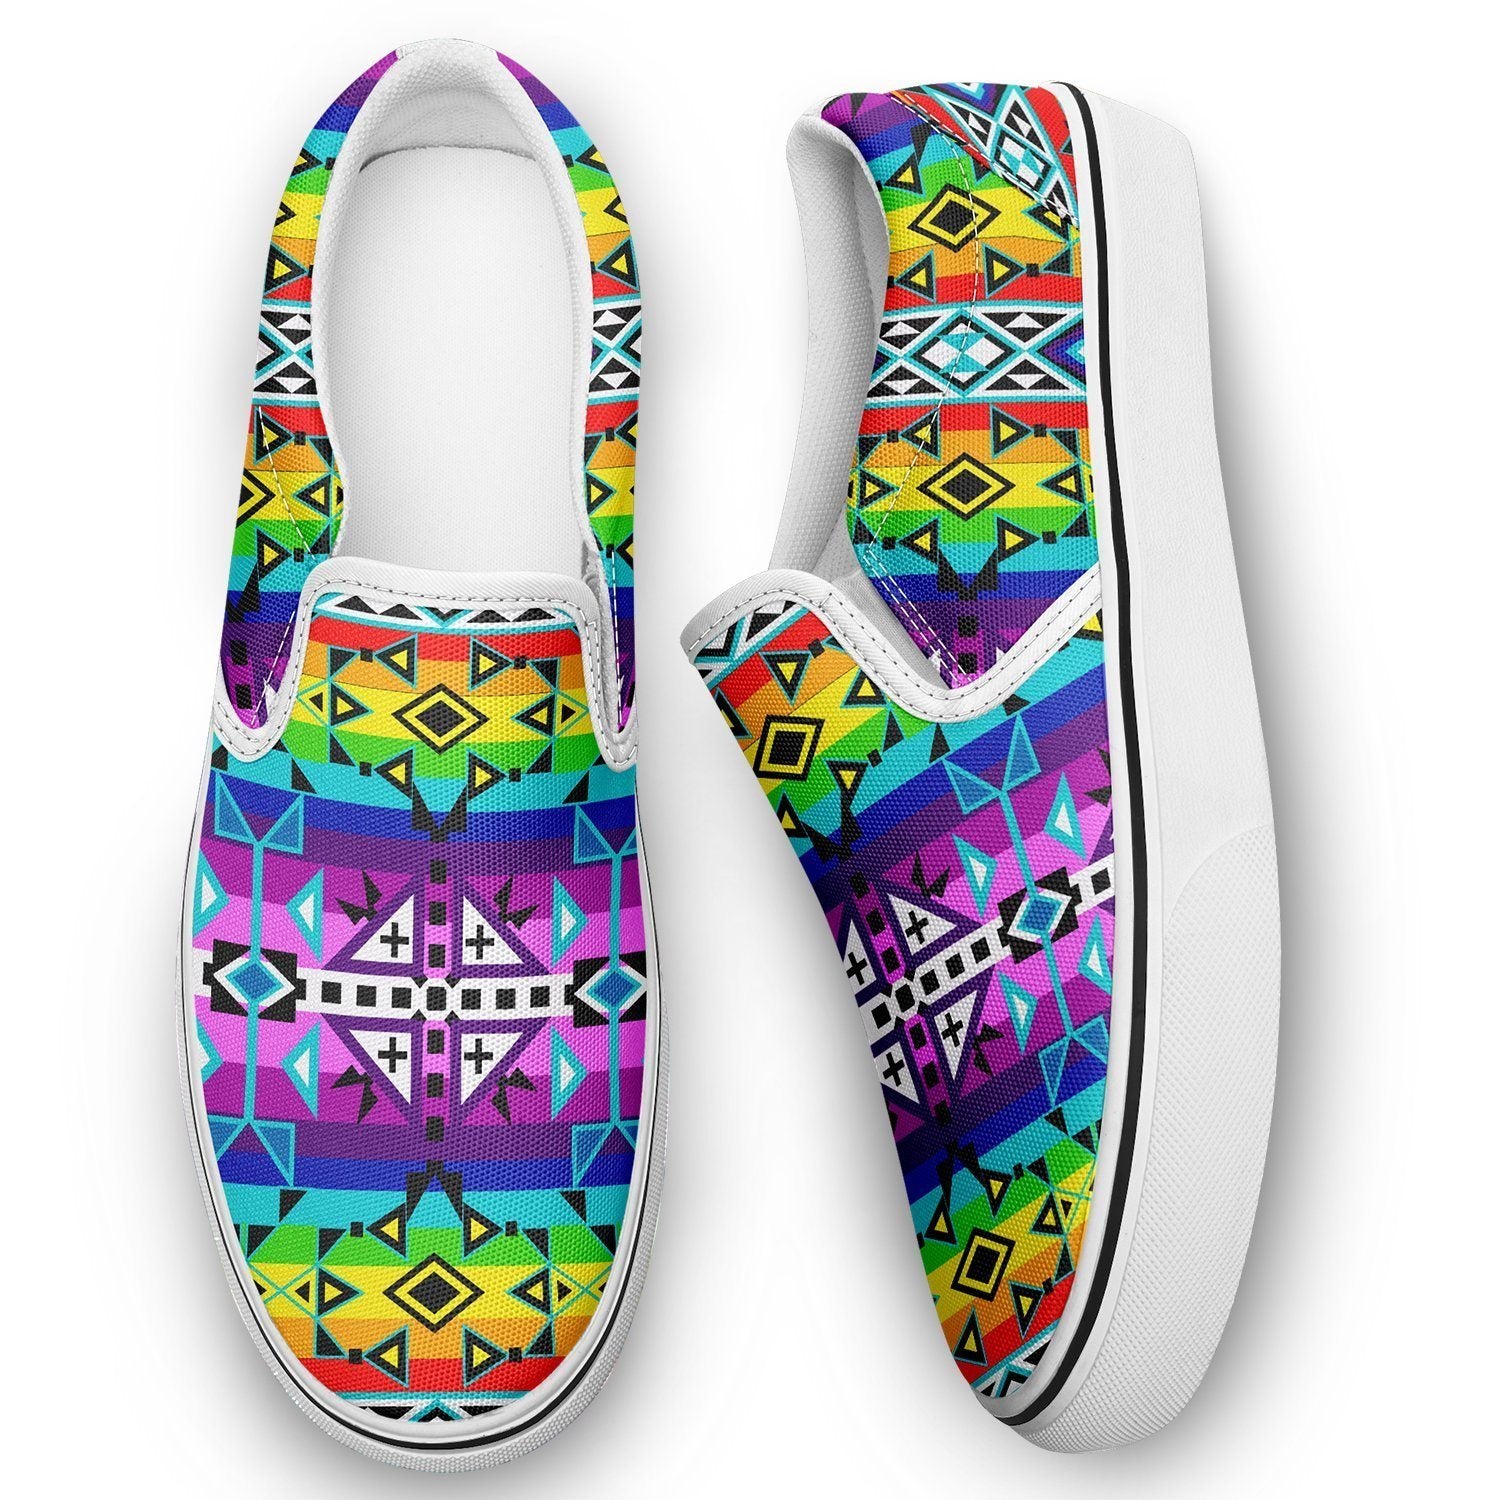 After the Rain Otoyimm Kid's Canvas Slip On Shoes 49 Dzine 